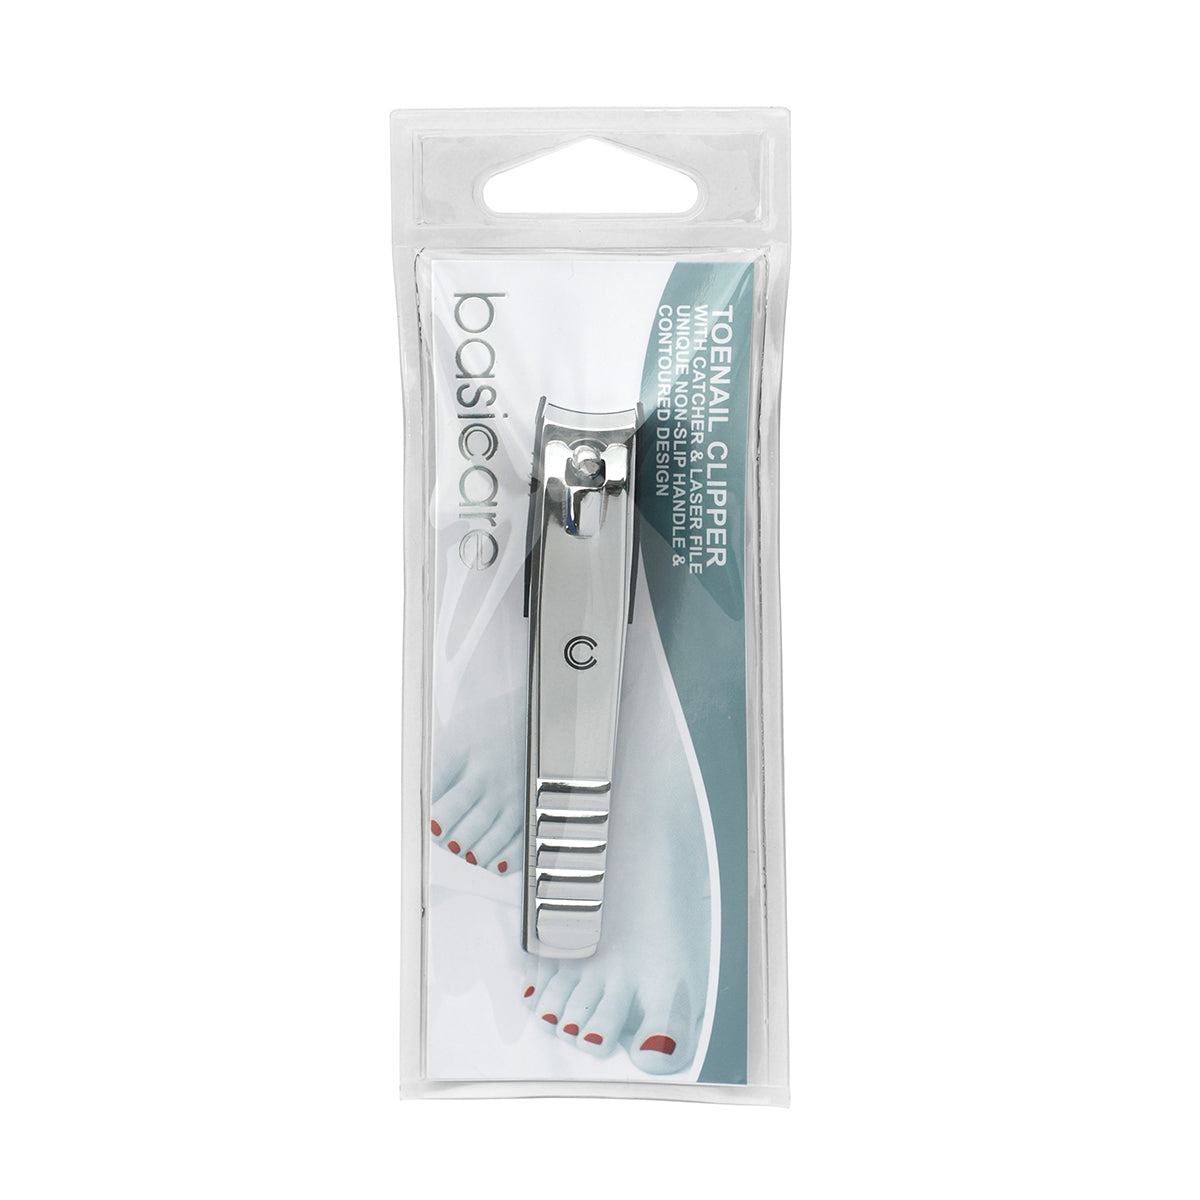 Basicare Curved Blade Nail Clipper (7616125370592)